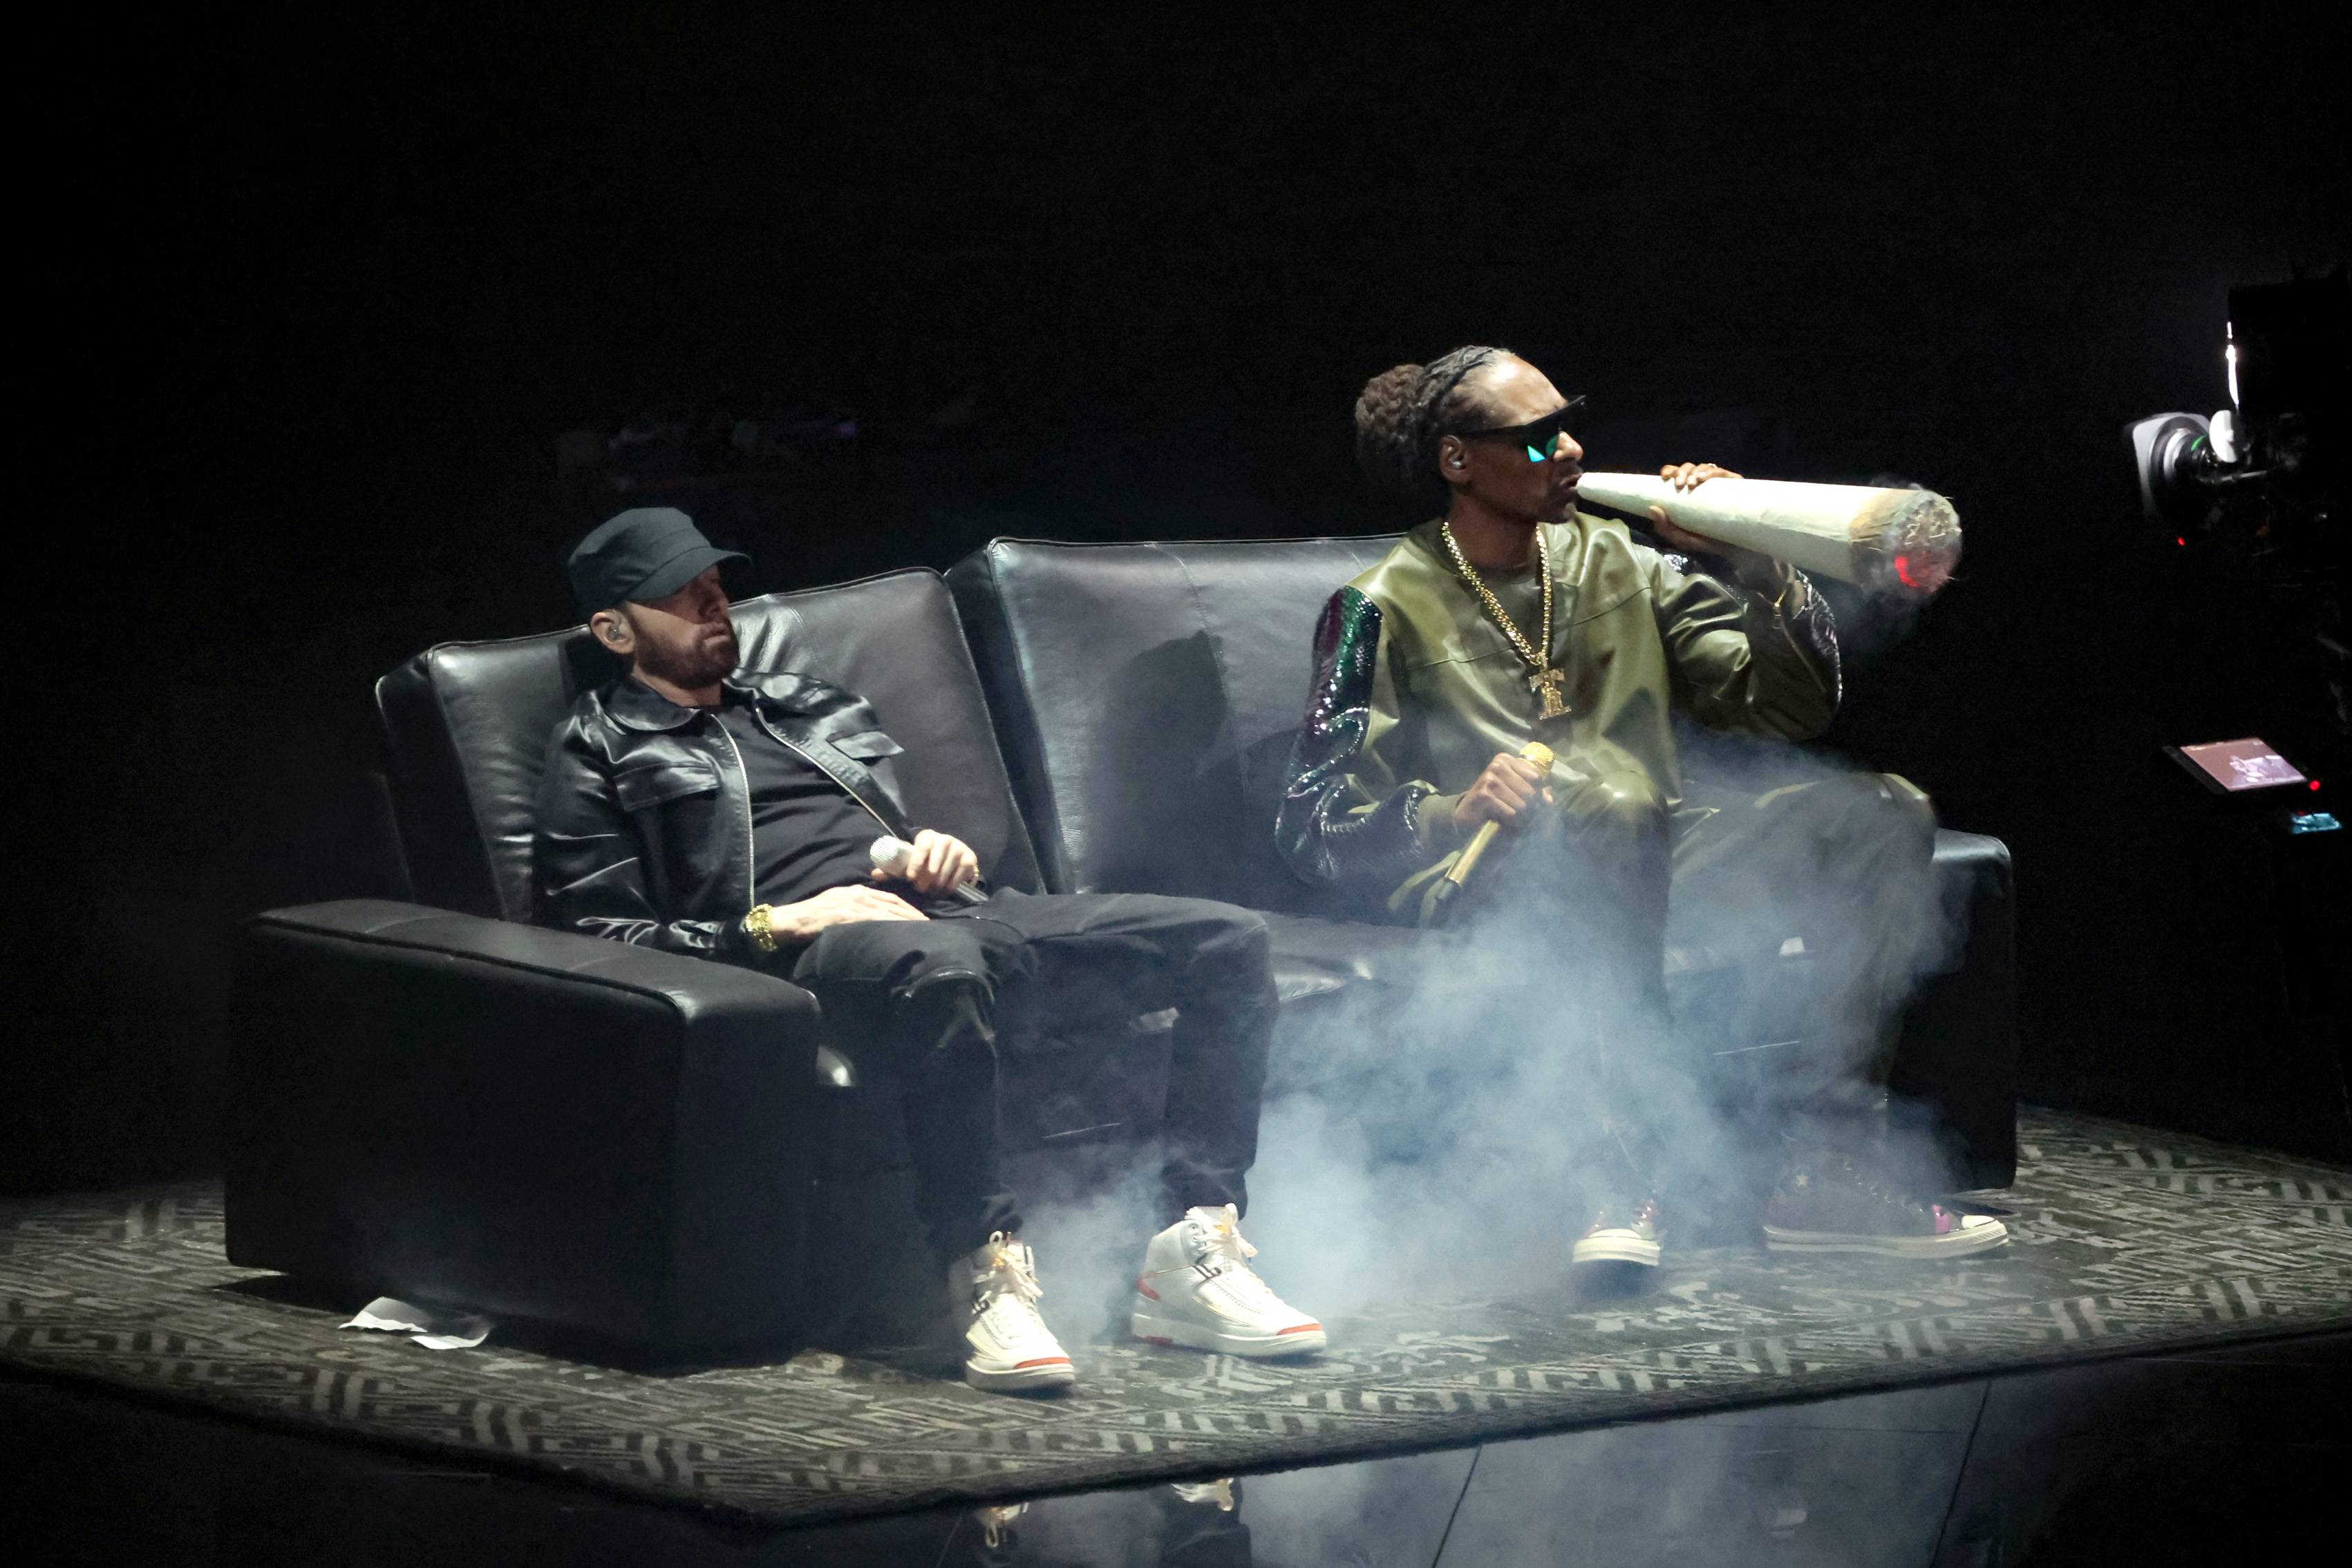 Eminem and Snoop Dogg smoke a giant blunt on a black couch during their 2022 MTV VMAs performance.